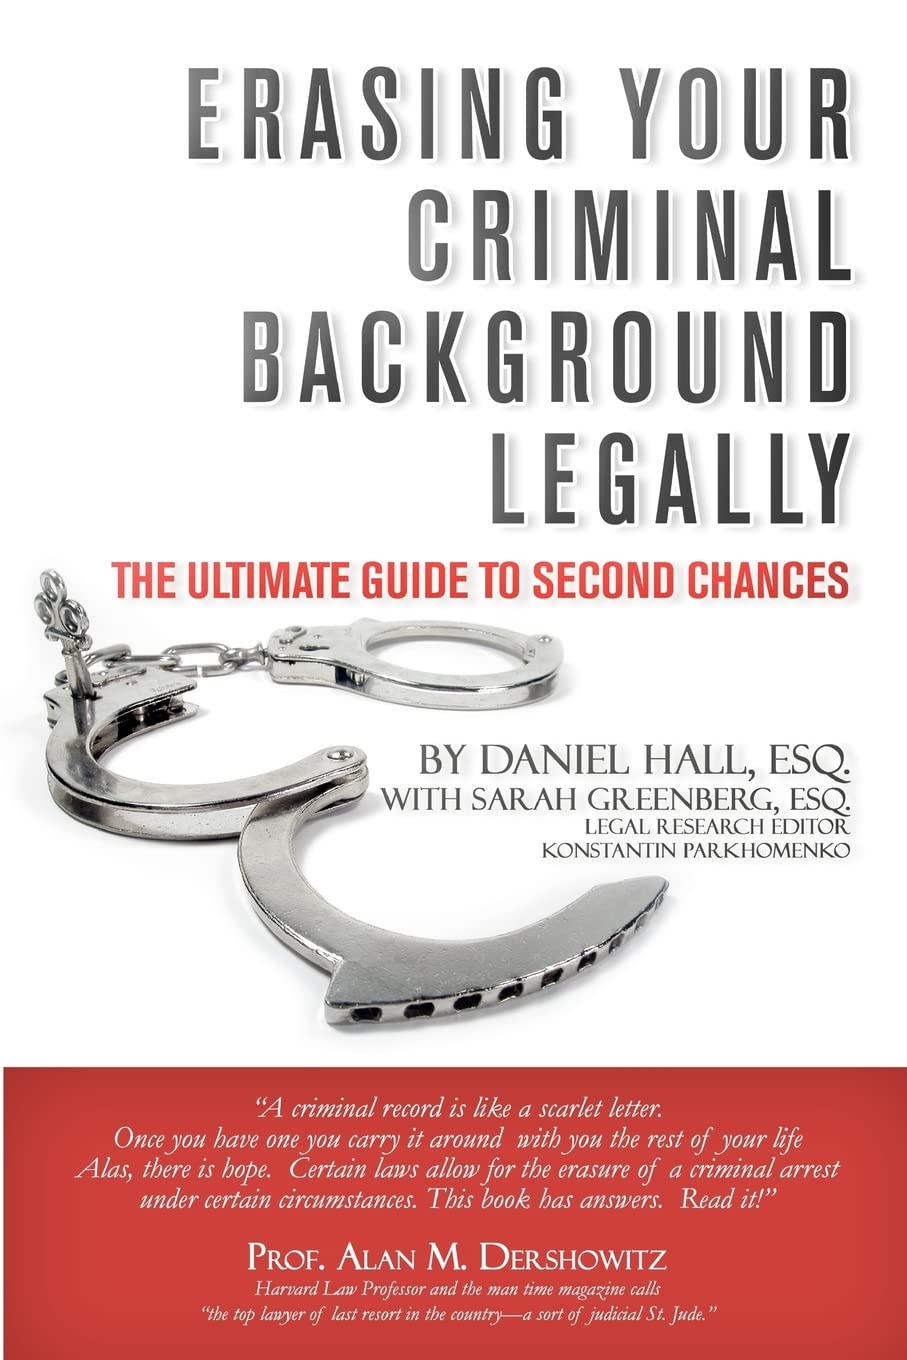 Erasing Your Criminal Background Legally - CA Corrections Bookstore